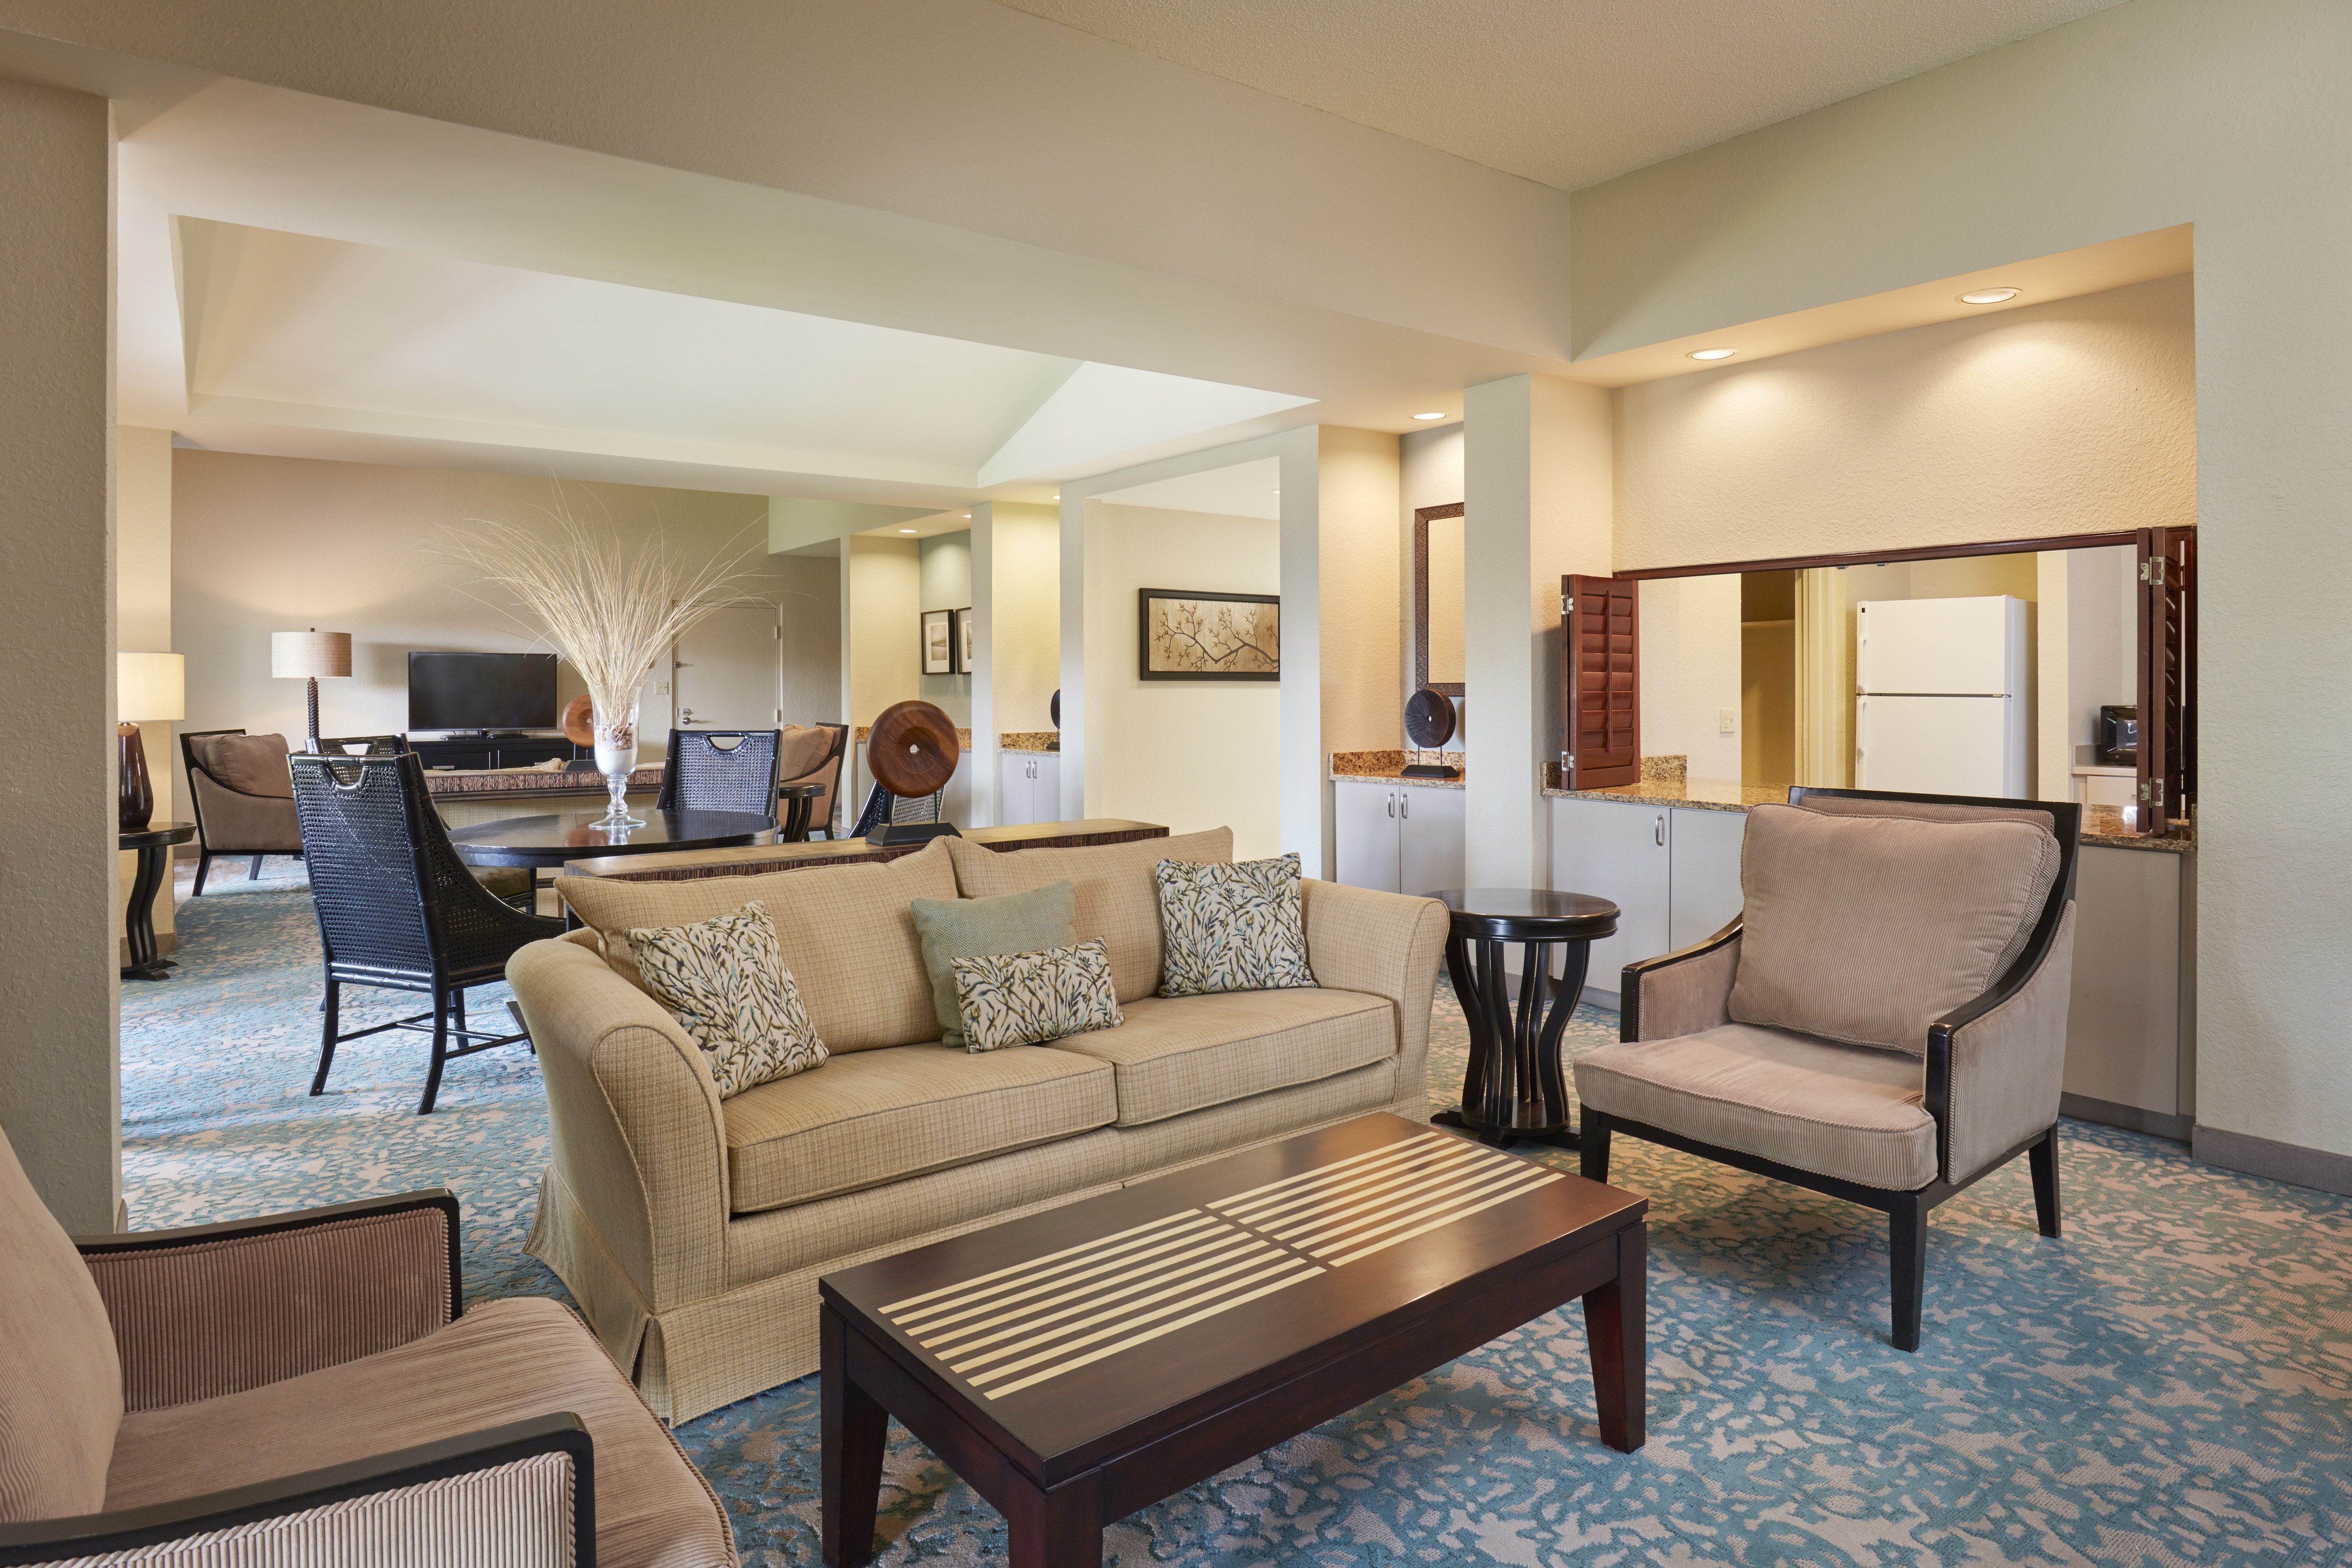 Suite Living Room with Lounge Seating Areas, Television and Kitchen